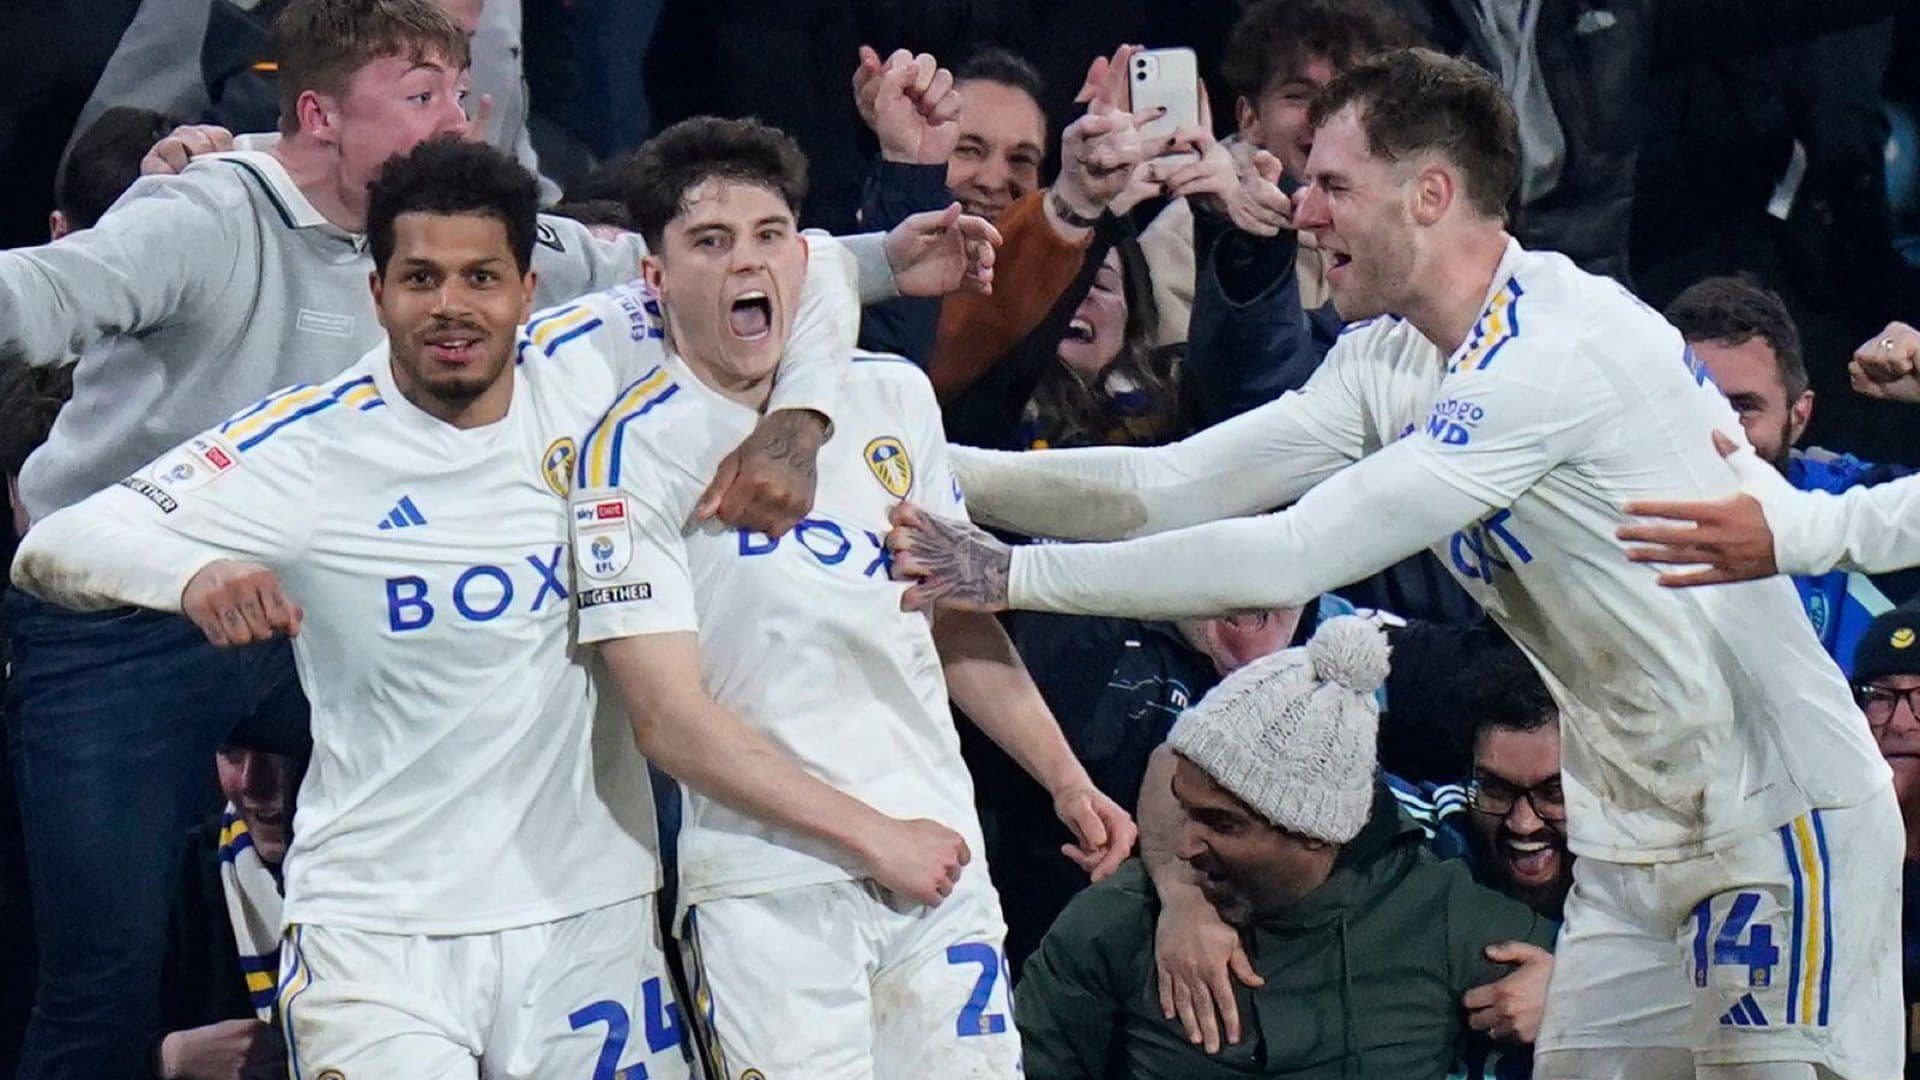 Dan James looks stunned and Georginio Rutter looks down the camera, as Rodon appears from miles away to celebrate Leeds' third goal against Hull